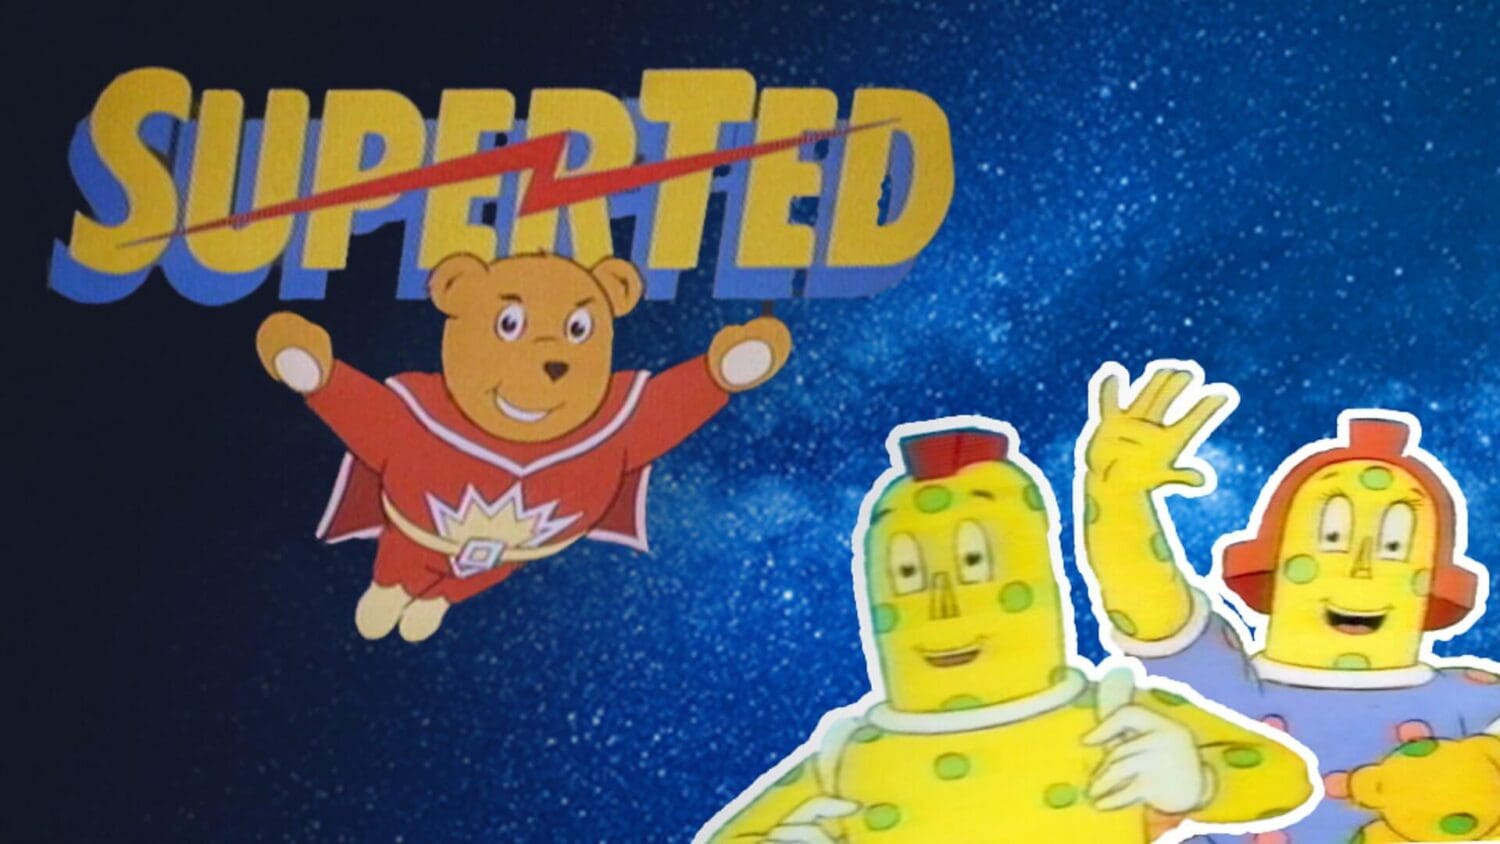 Superted - 80s space cartoon